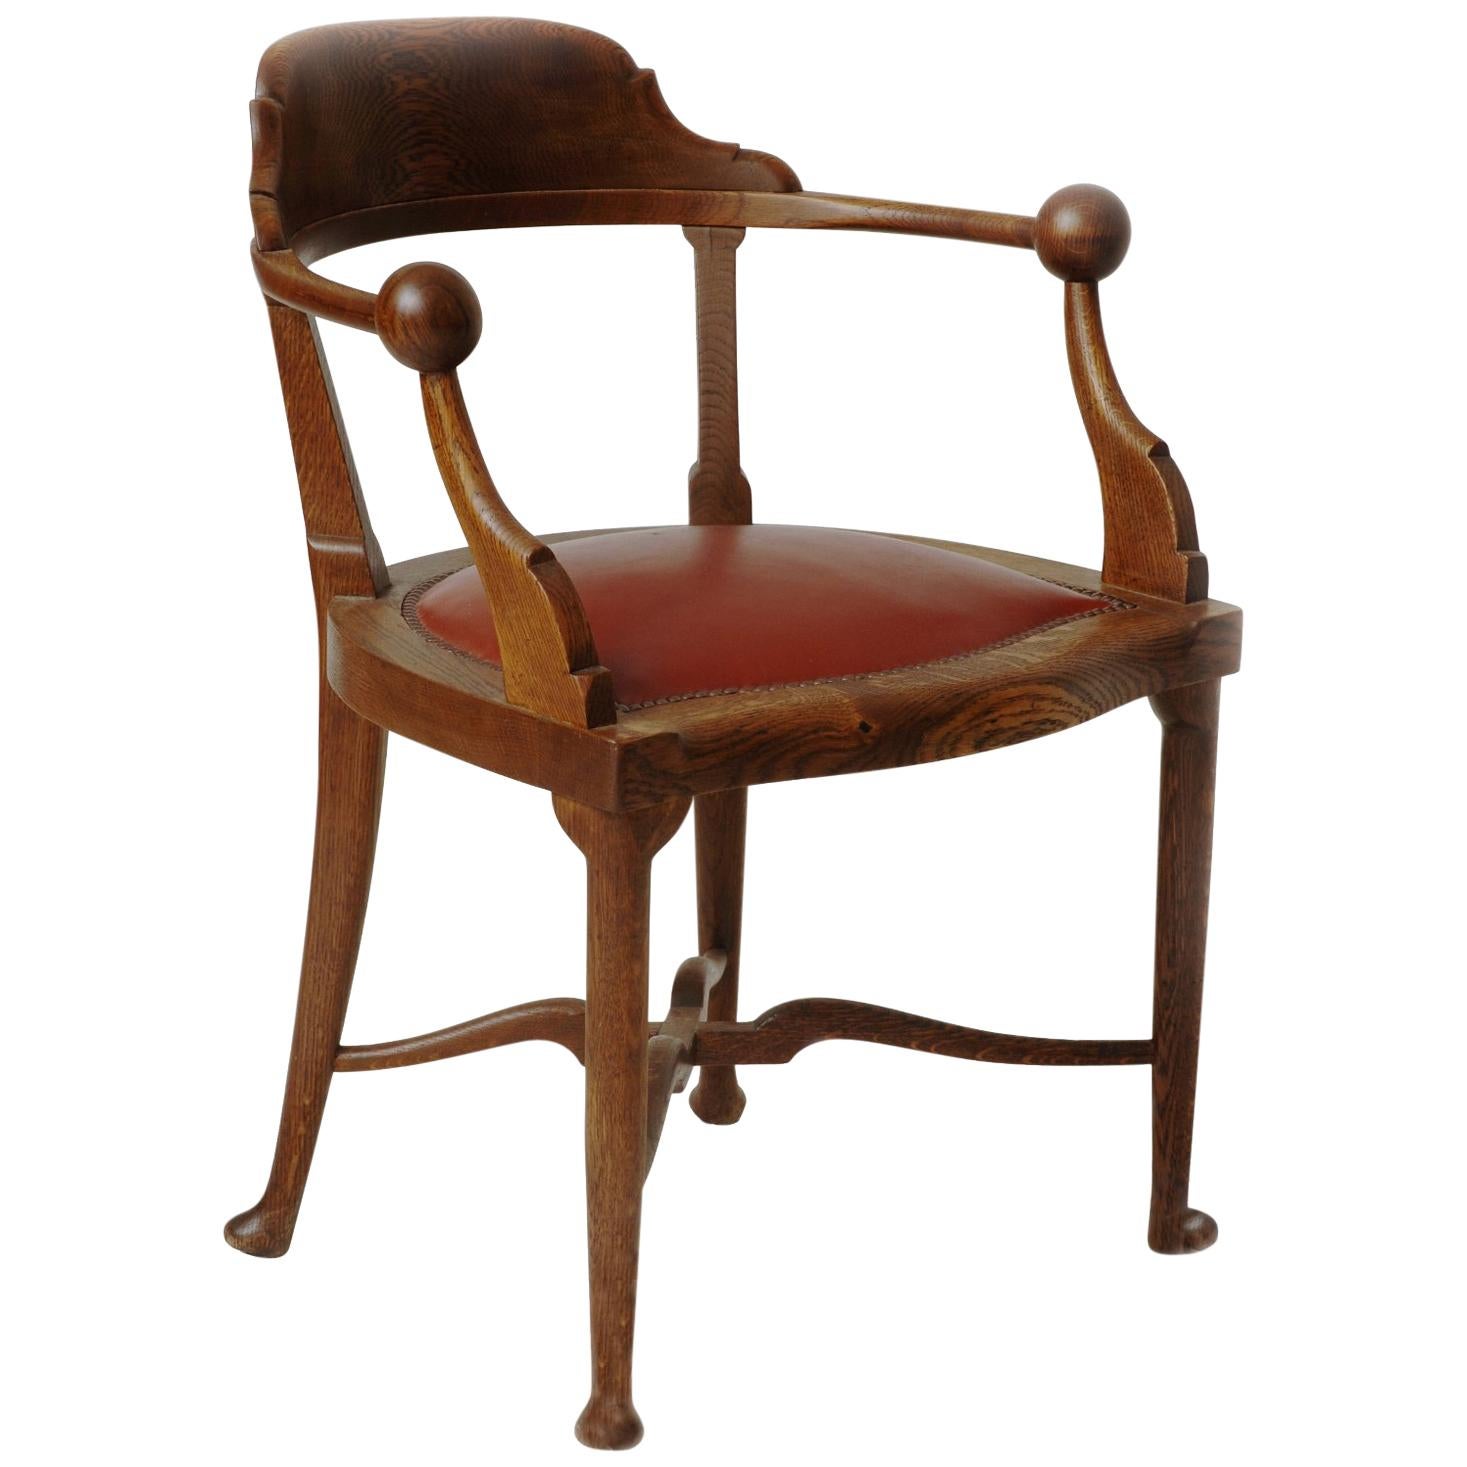 Iconic Karoly Lingel Solid Oak Two Spheres Armchair, Hungary, 1900s For Sale